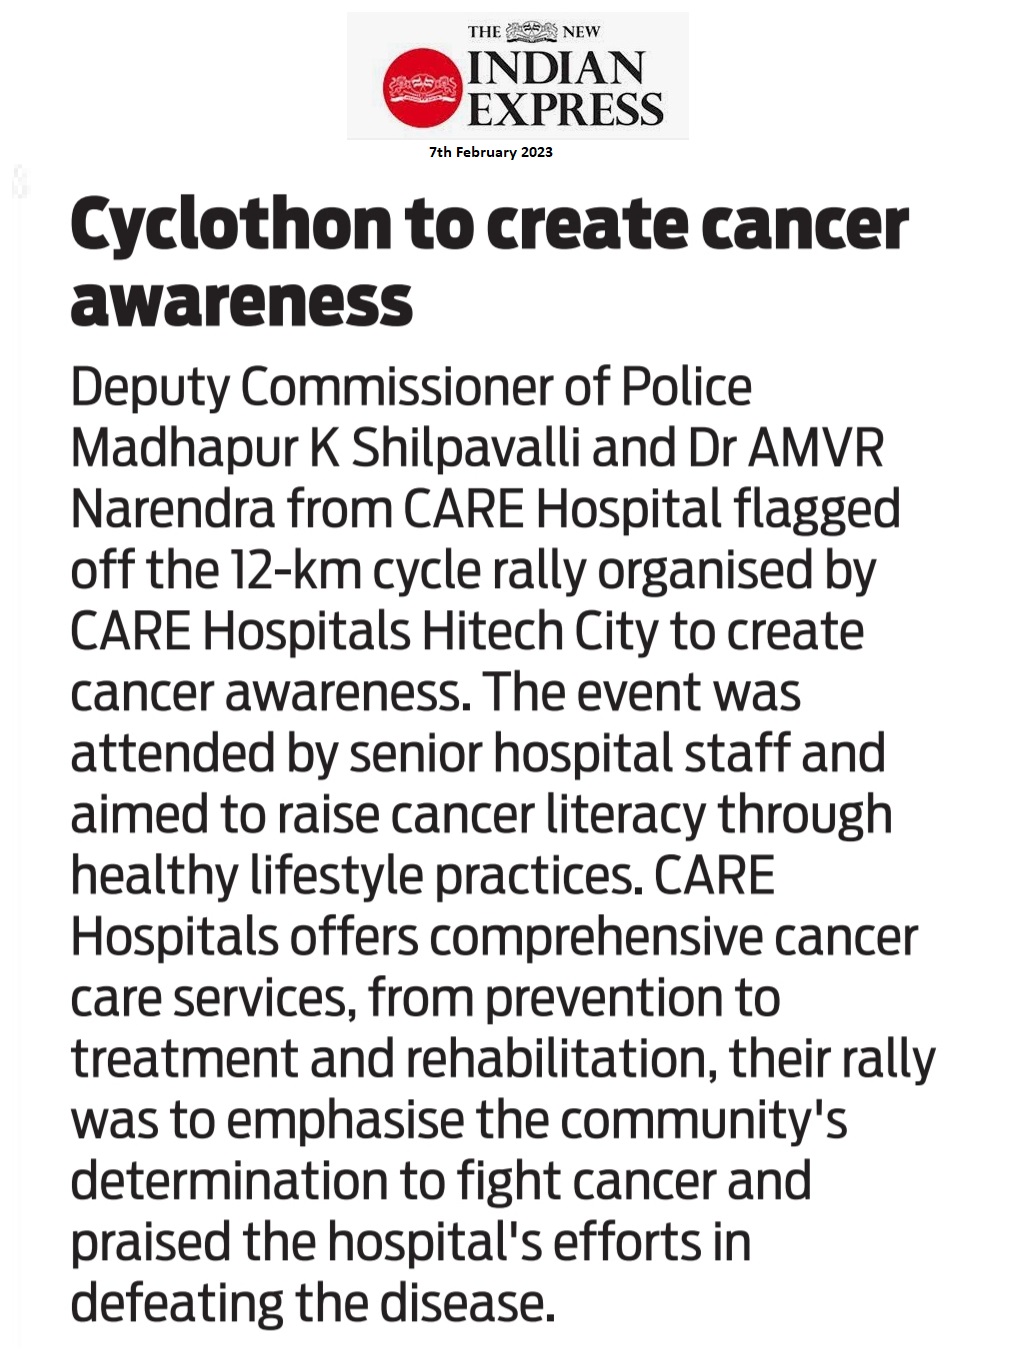 Cyclothan News Coverage in The New Indian Express